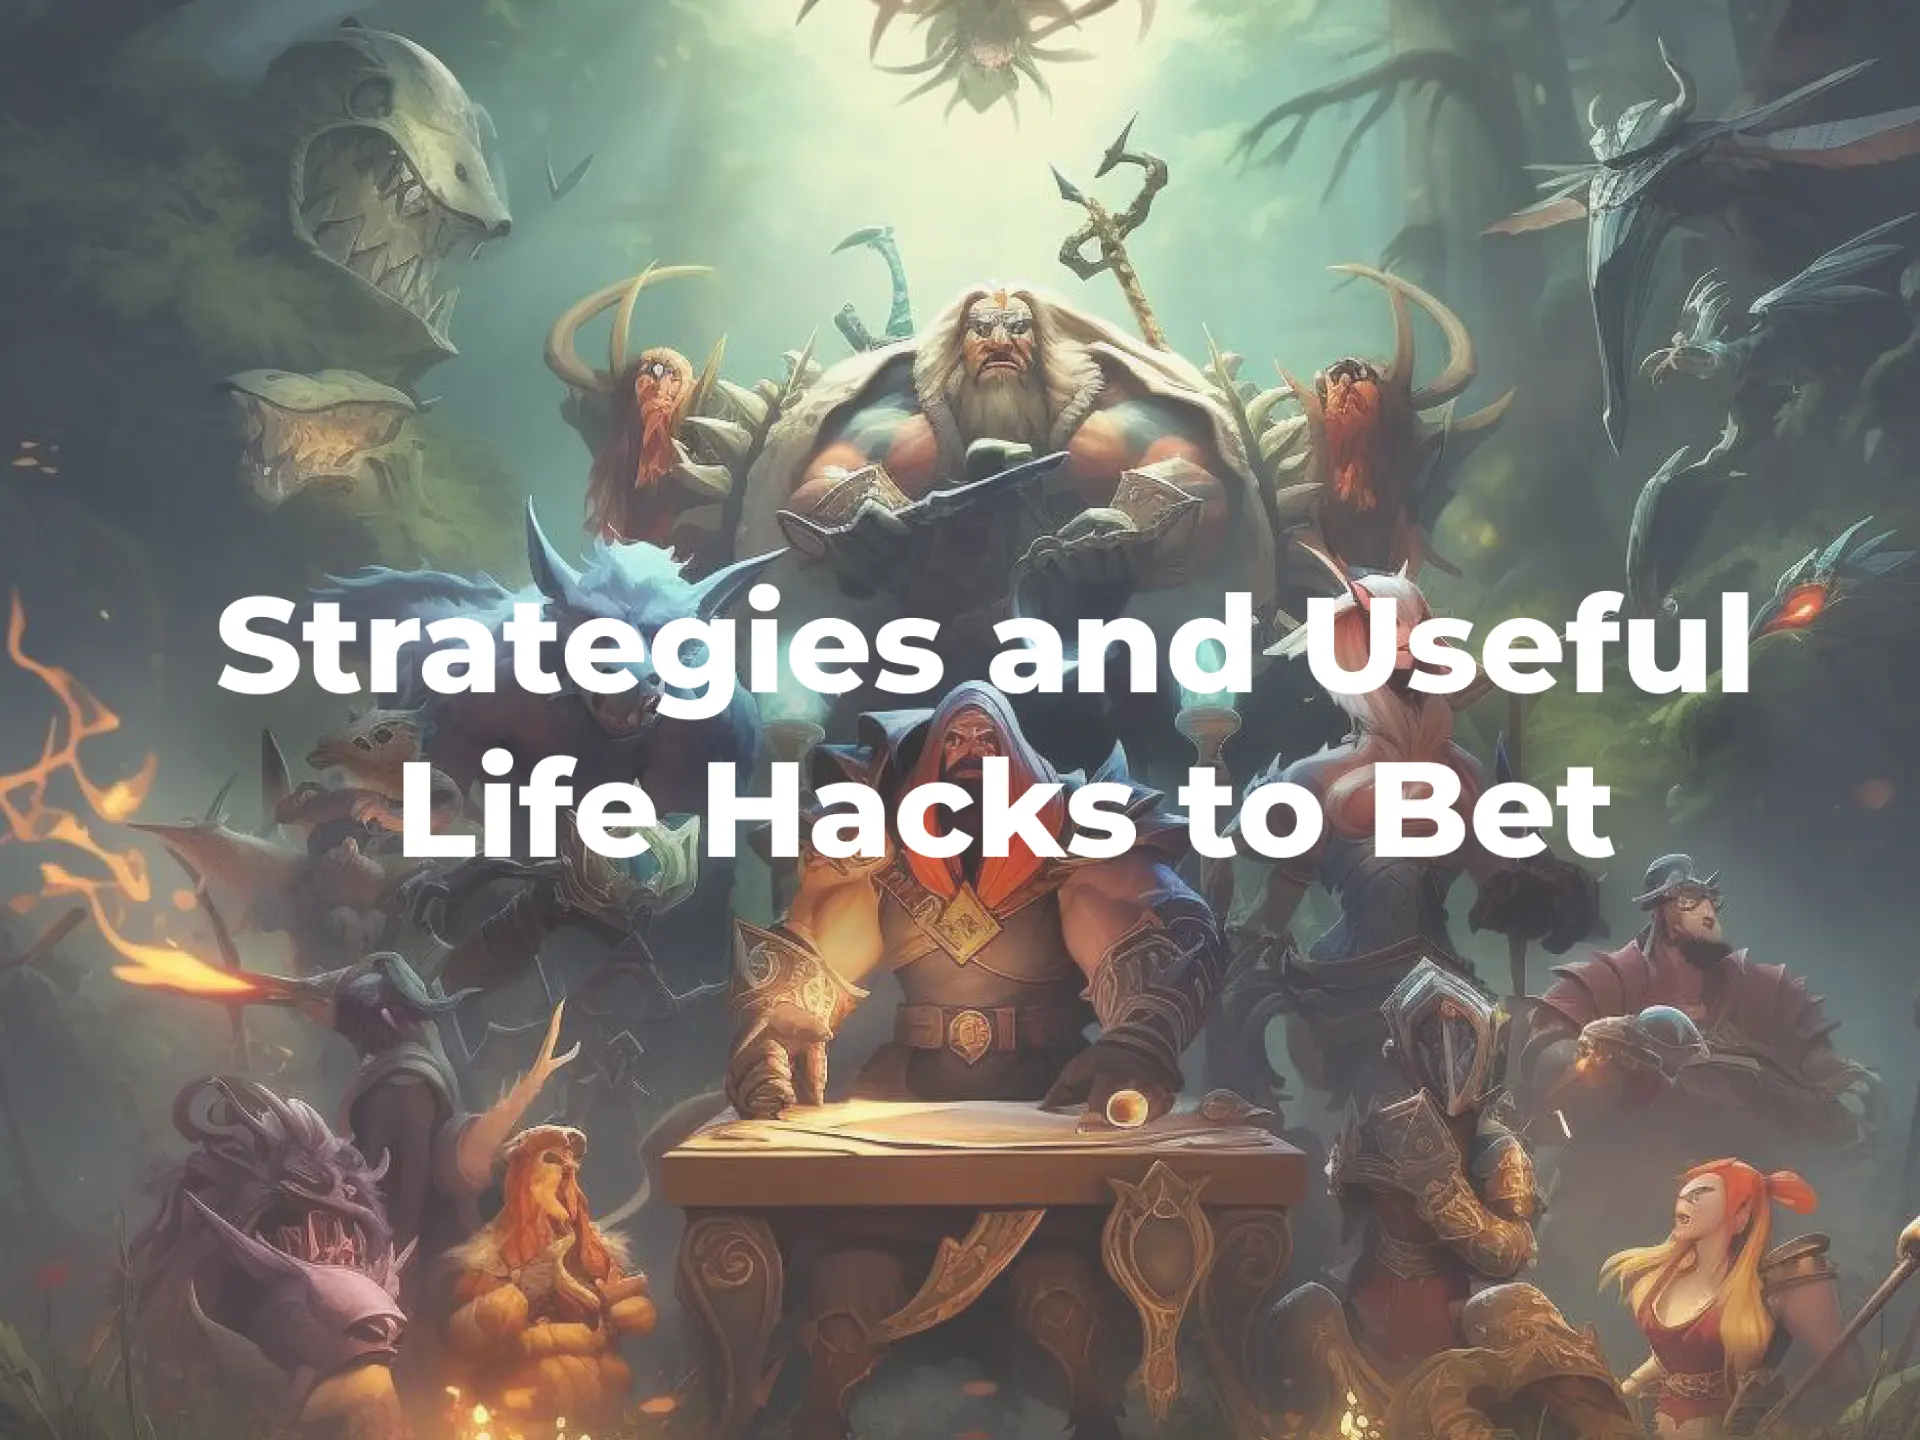 Take advantage of strategies and useful lifehacks to improve your odds in Dota 2 betting.